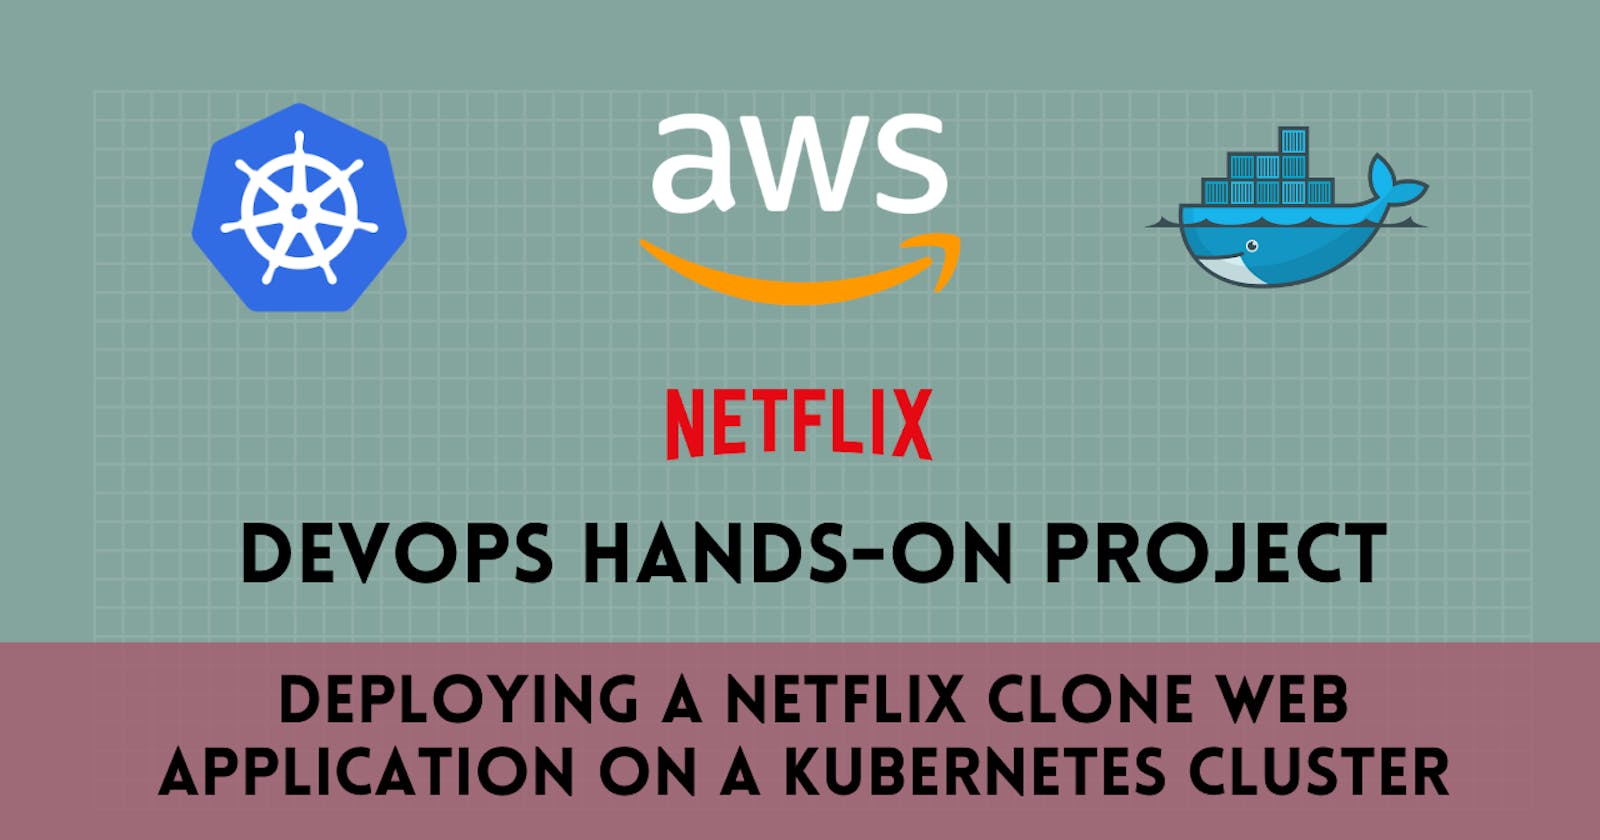 DevOps Hands-On Project - Deploying a Netflix Clone Web Application on a Kubernetes Cluster